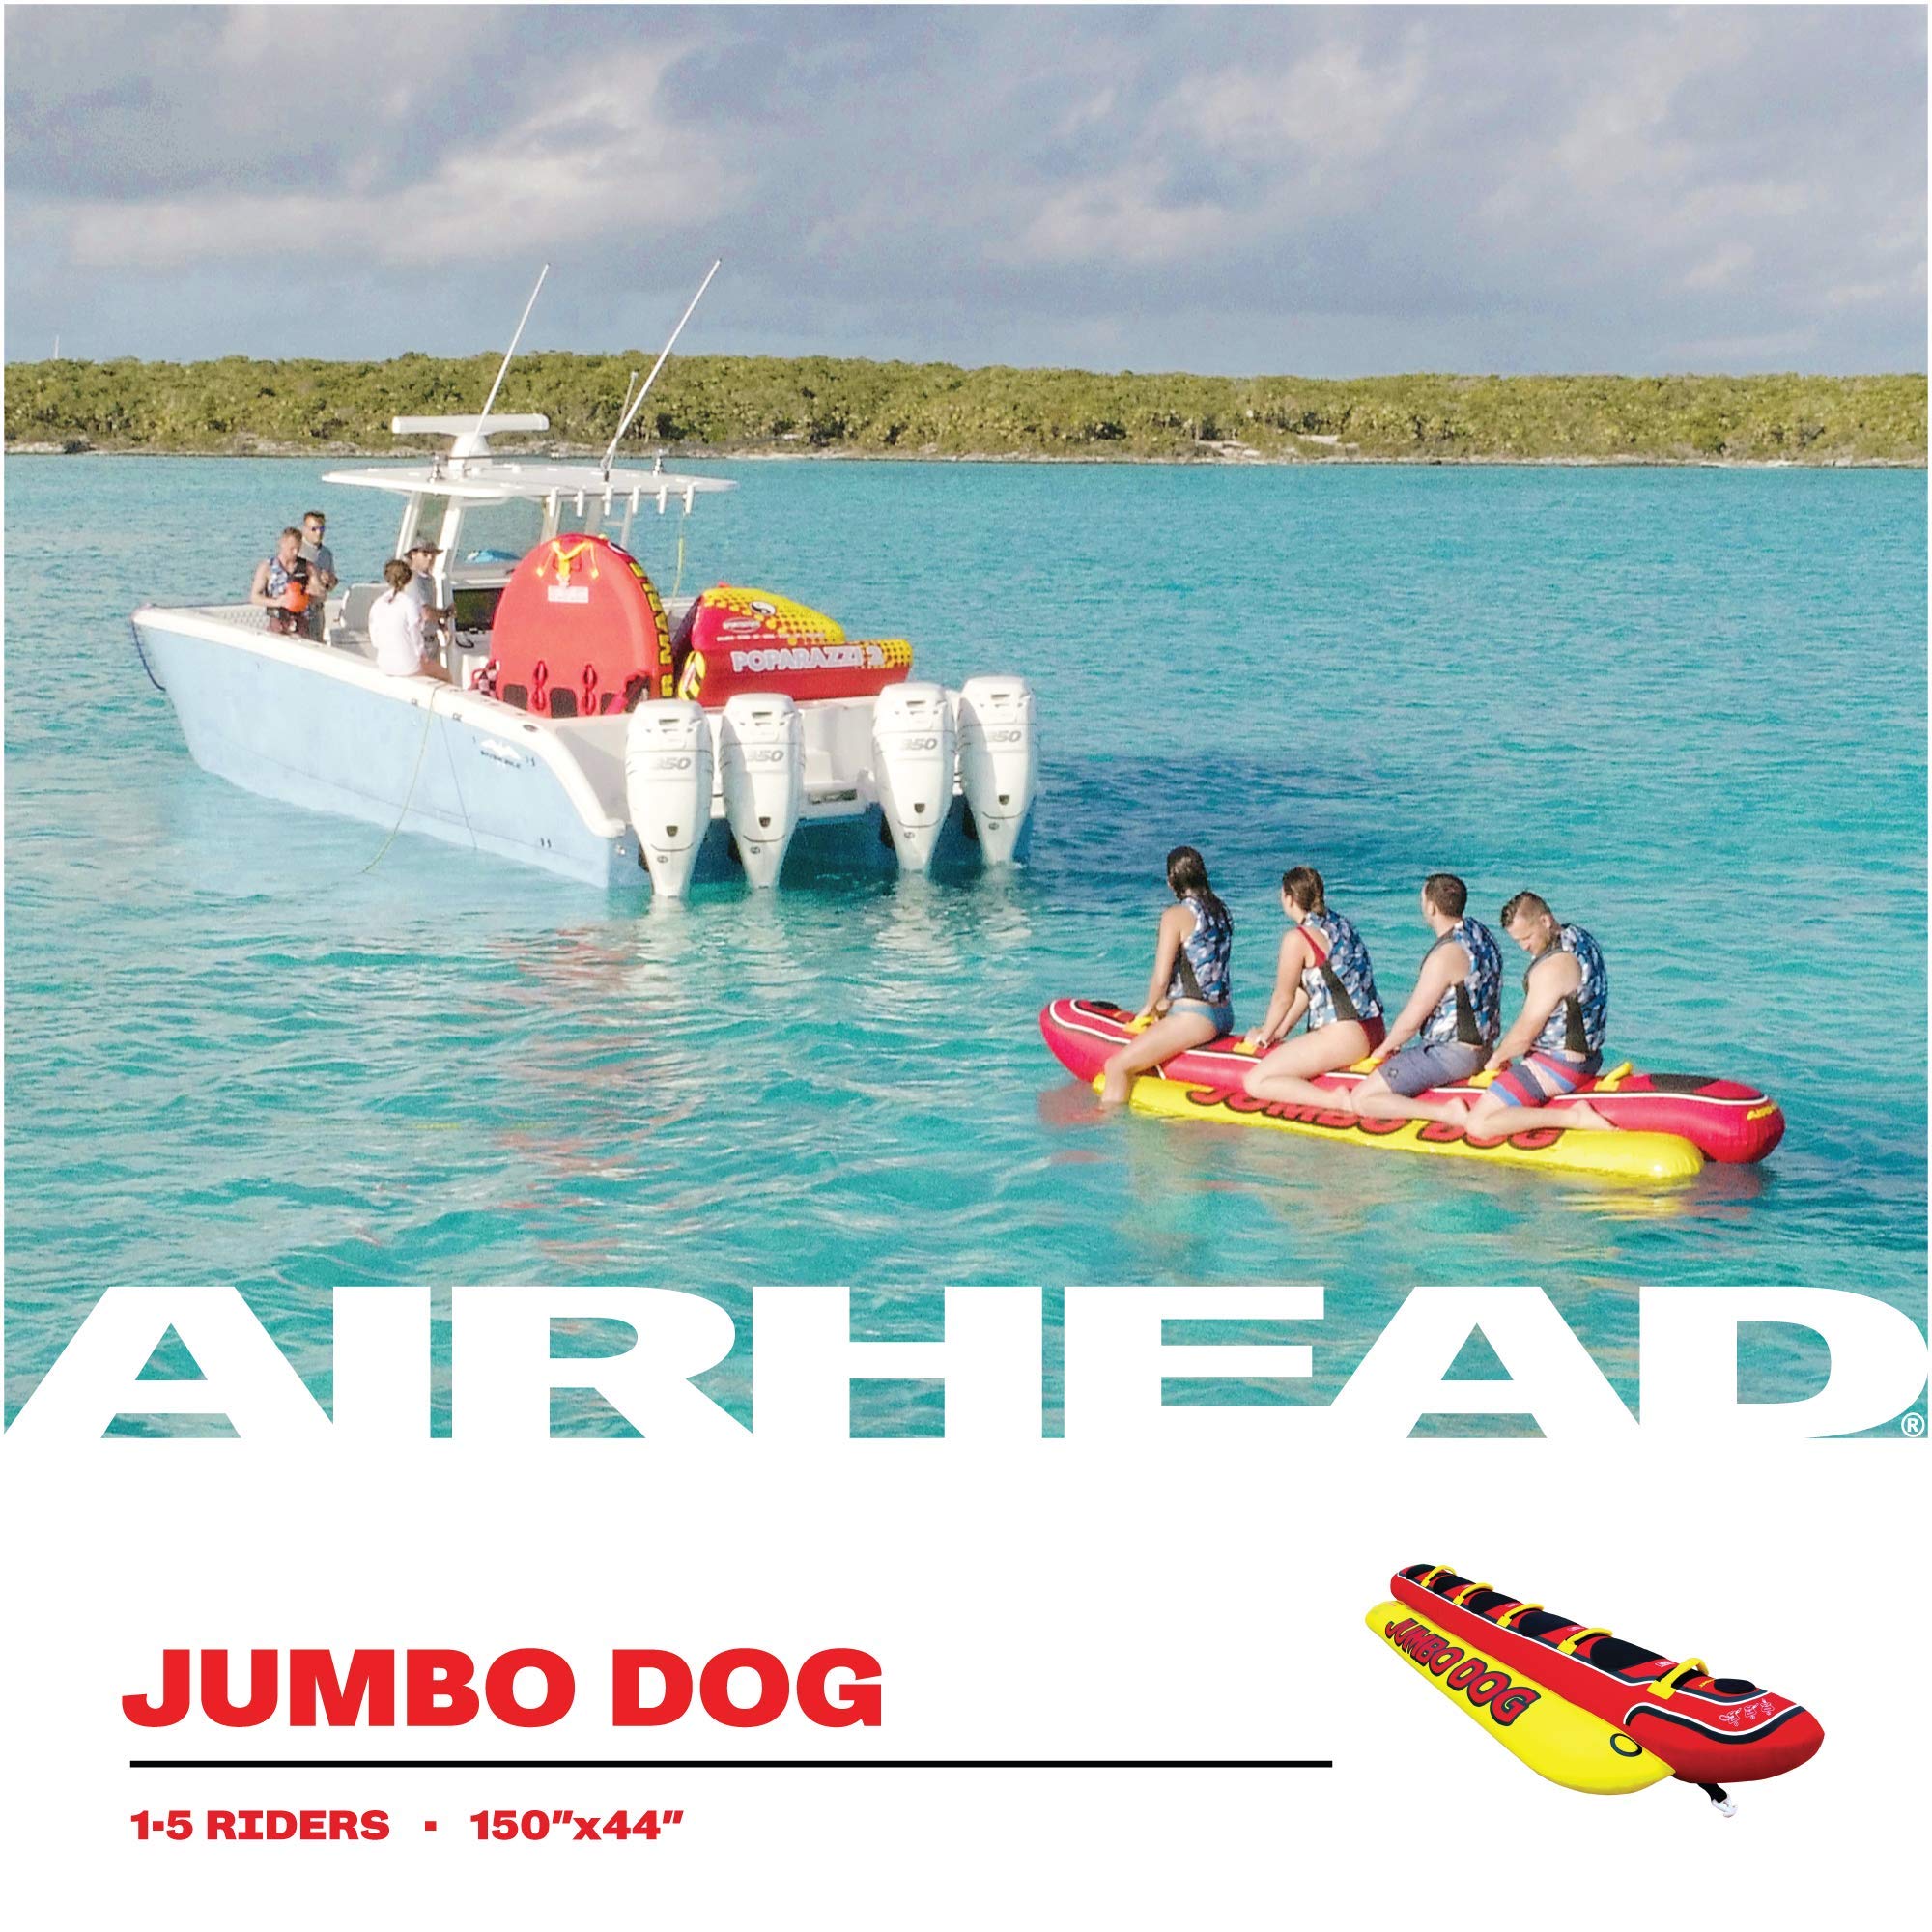 Airhead Hot Dog Towable 1-5 Rider Tube for Boating and Water Sports, Neoprene Seat Pads, Double-Stitched Full Nylon Cover, and Boston Valve for Convenient Inflating & Deflating